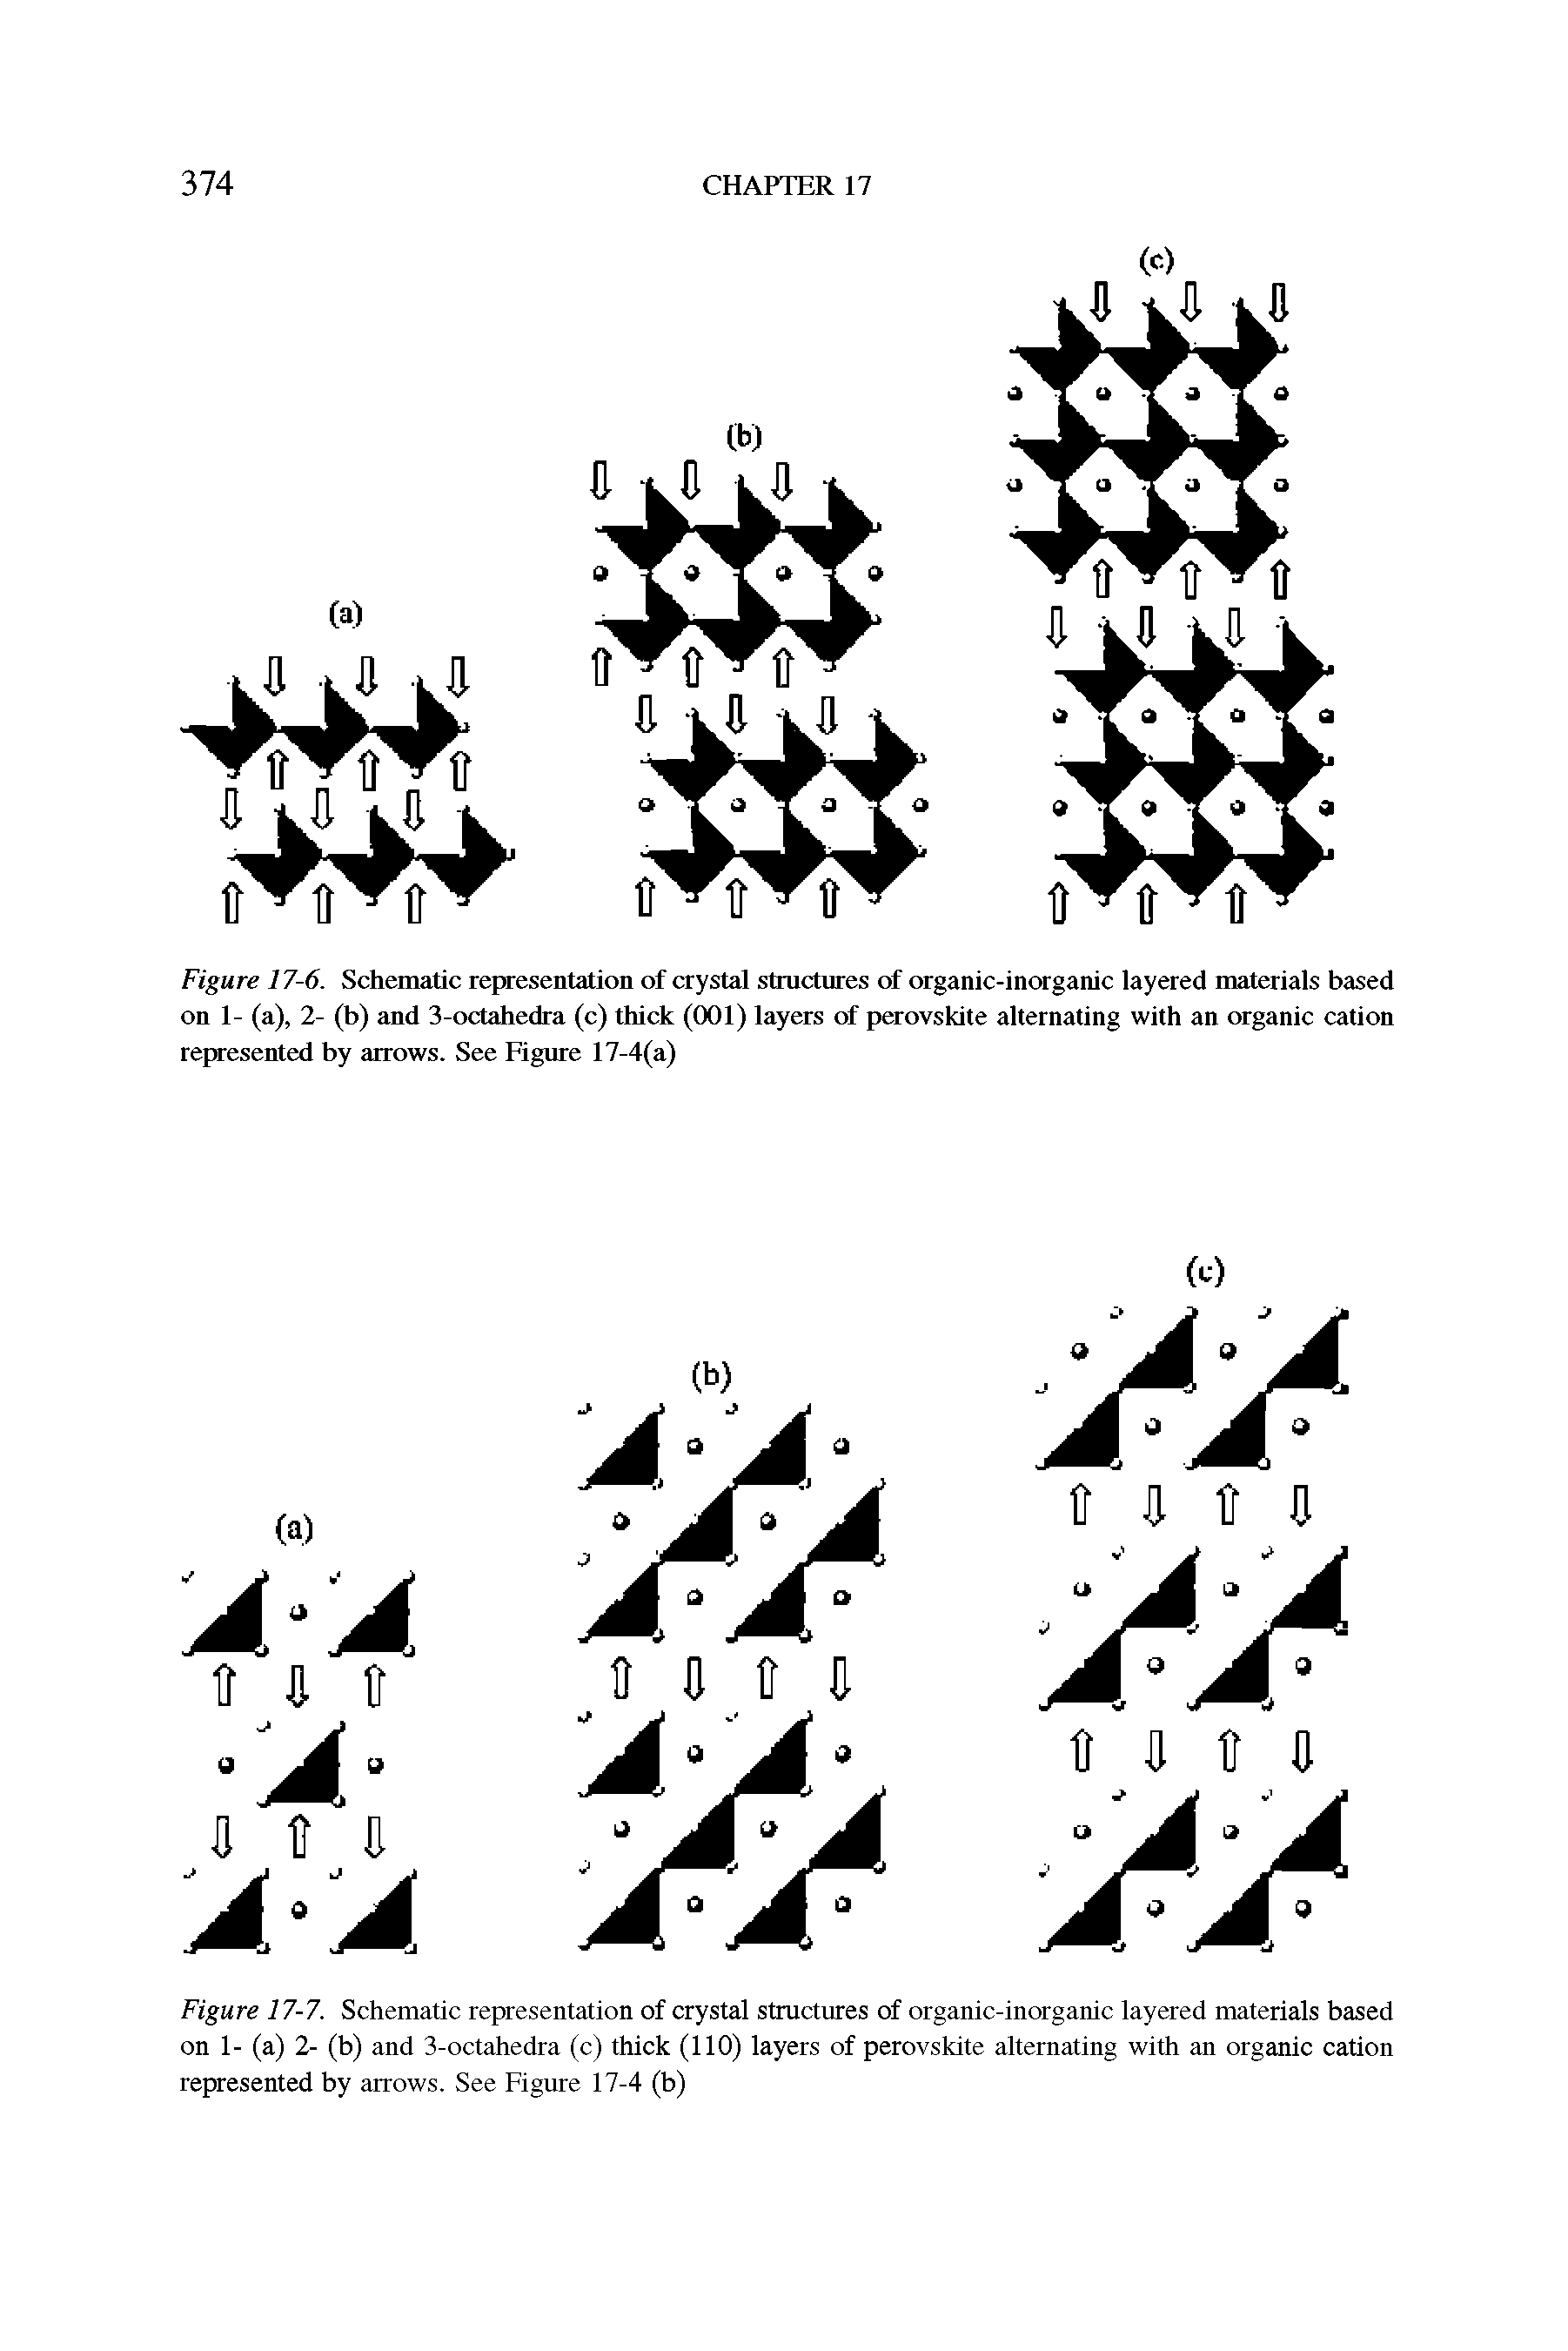 Figure 17-6. Schematic representation of crystal structures of organic-inorganic layered materials based on 1- (a), 2- (b) and 3-octahedra (c) thick (001) layers of perovskite alternating with an organic cation represented by arrows. See Figure 17-4(a)...